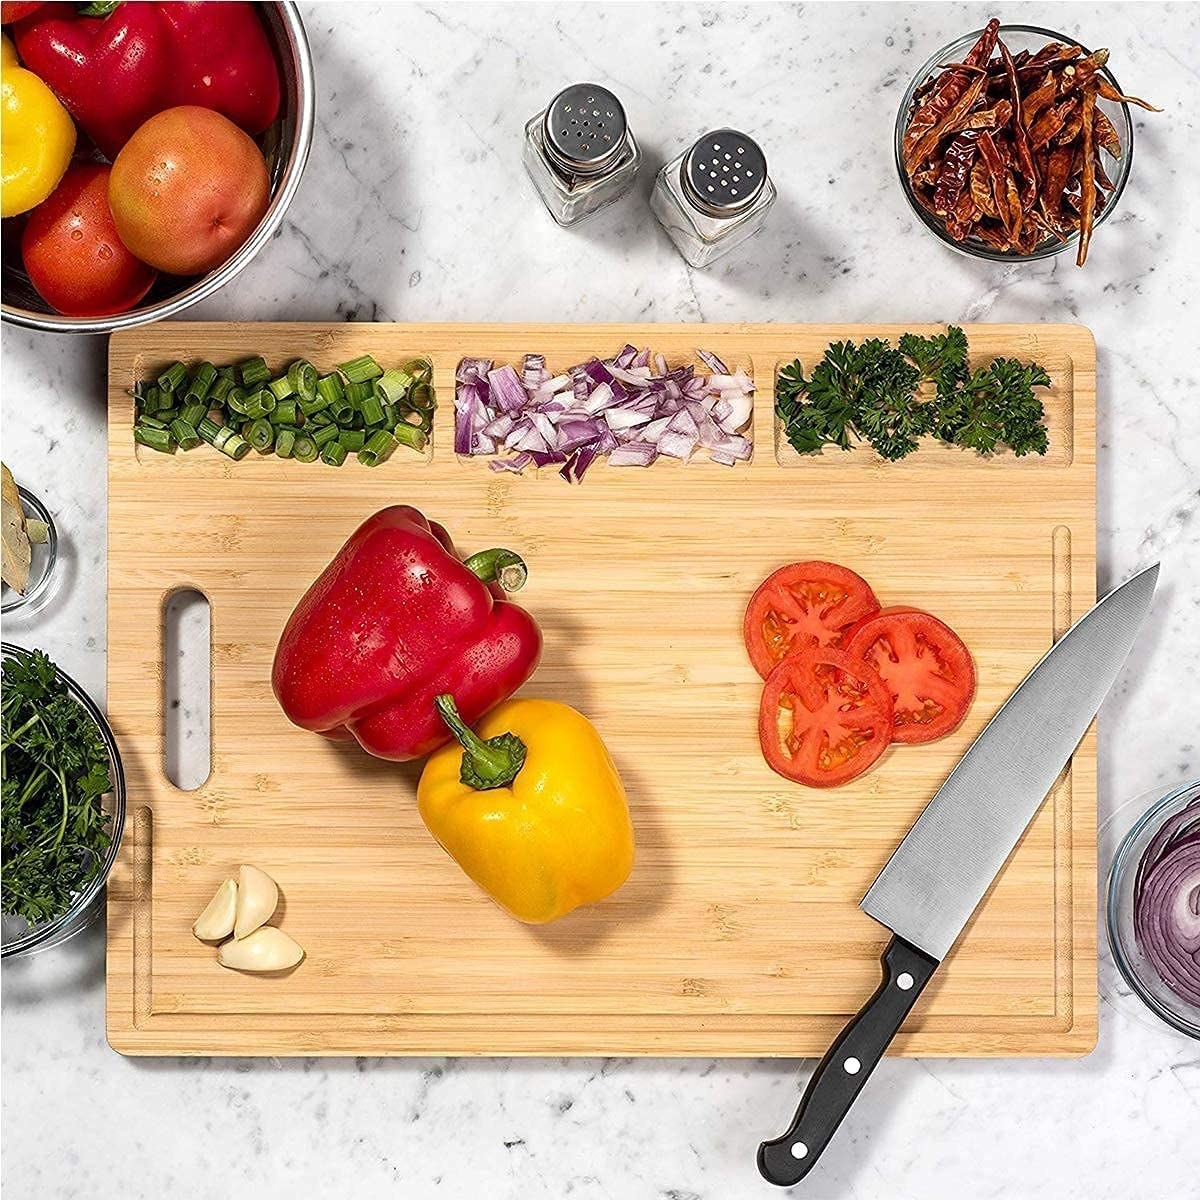 The cutting board with ingredients on ot